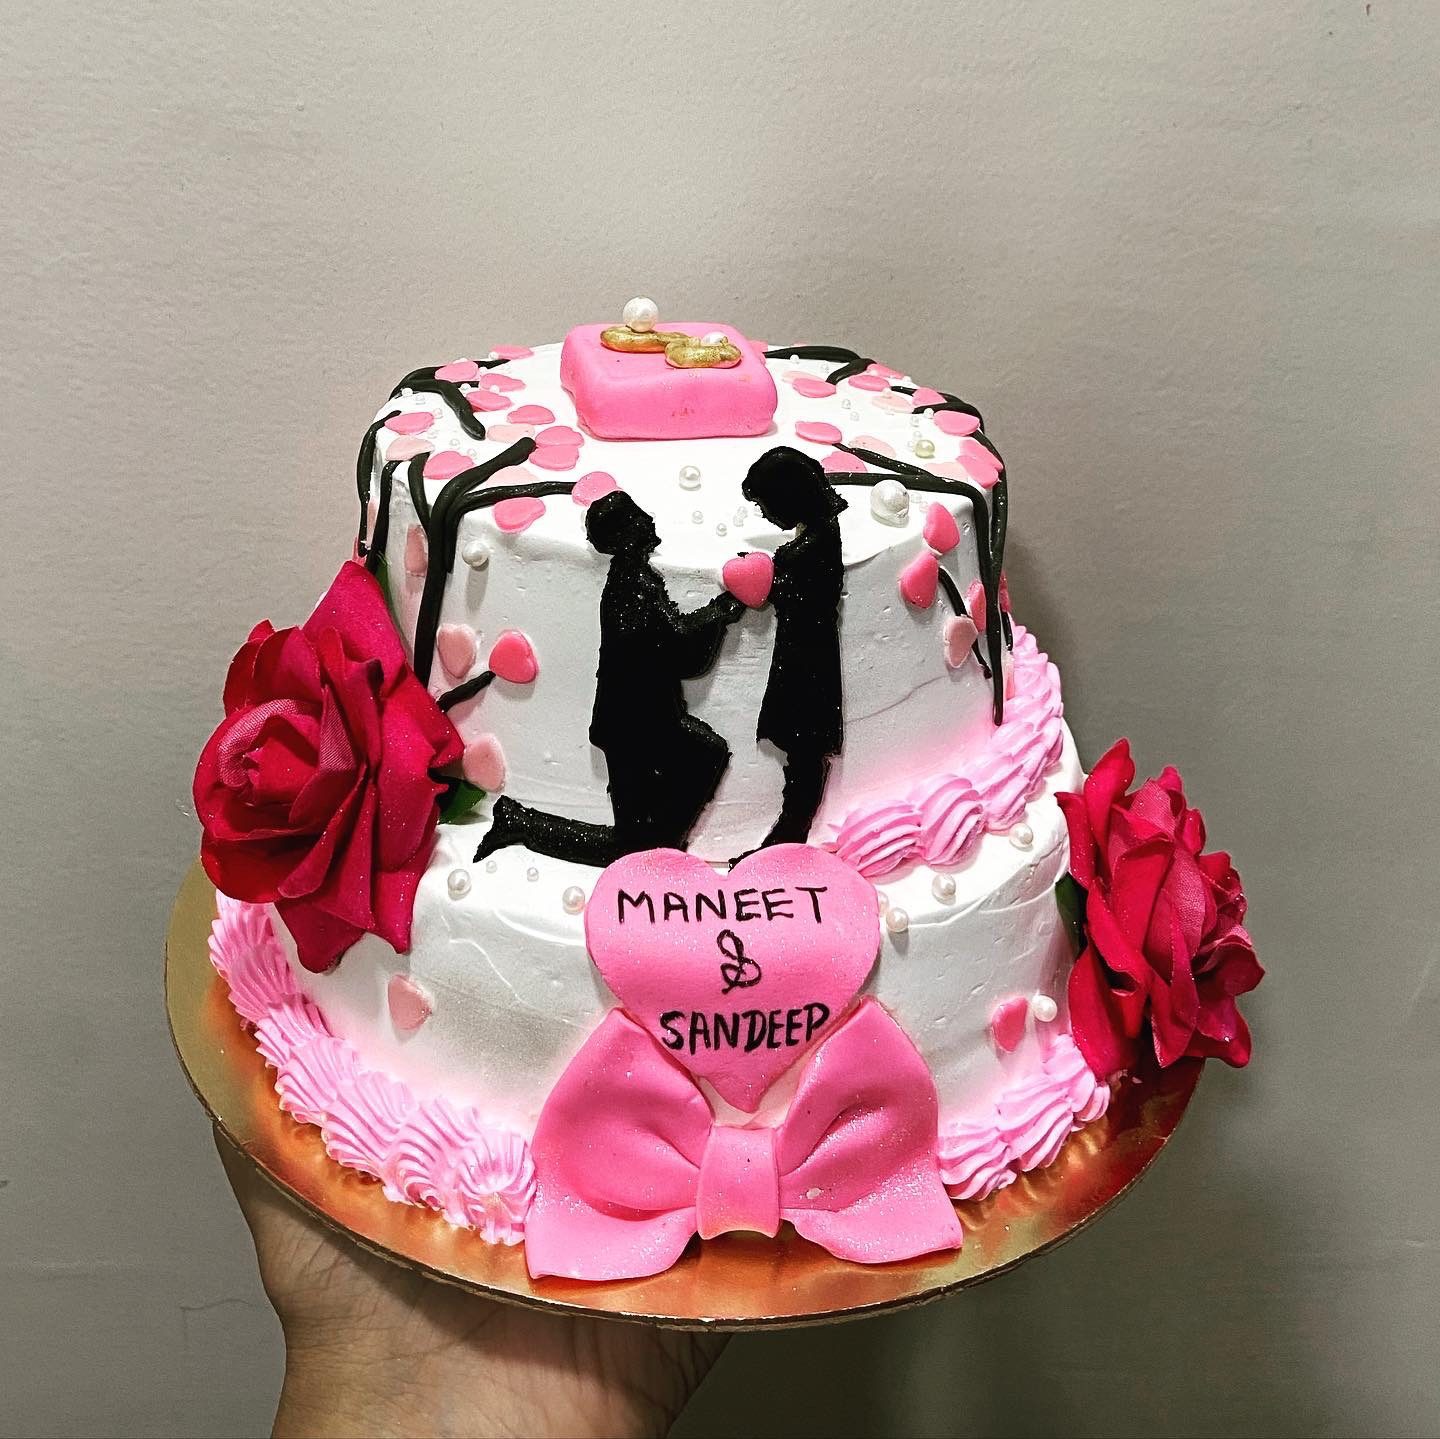 2 KG Engagement Cake Near Scoops Ice cream Parlor, Moosarambagh Road, Sripuram Colony, East Prasanth Nagar, Moosarambagh, Hyderabad | Delivery Date: 26 January 2023 Designs, Images, Price Near Me